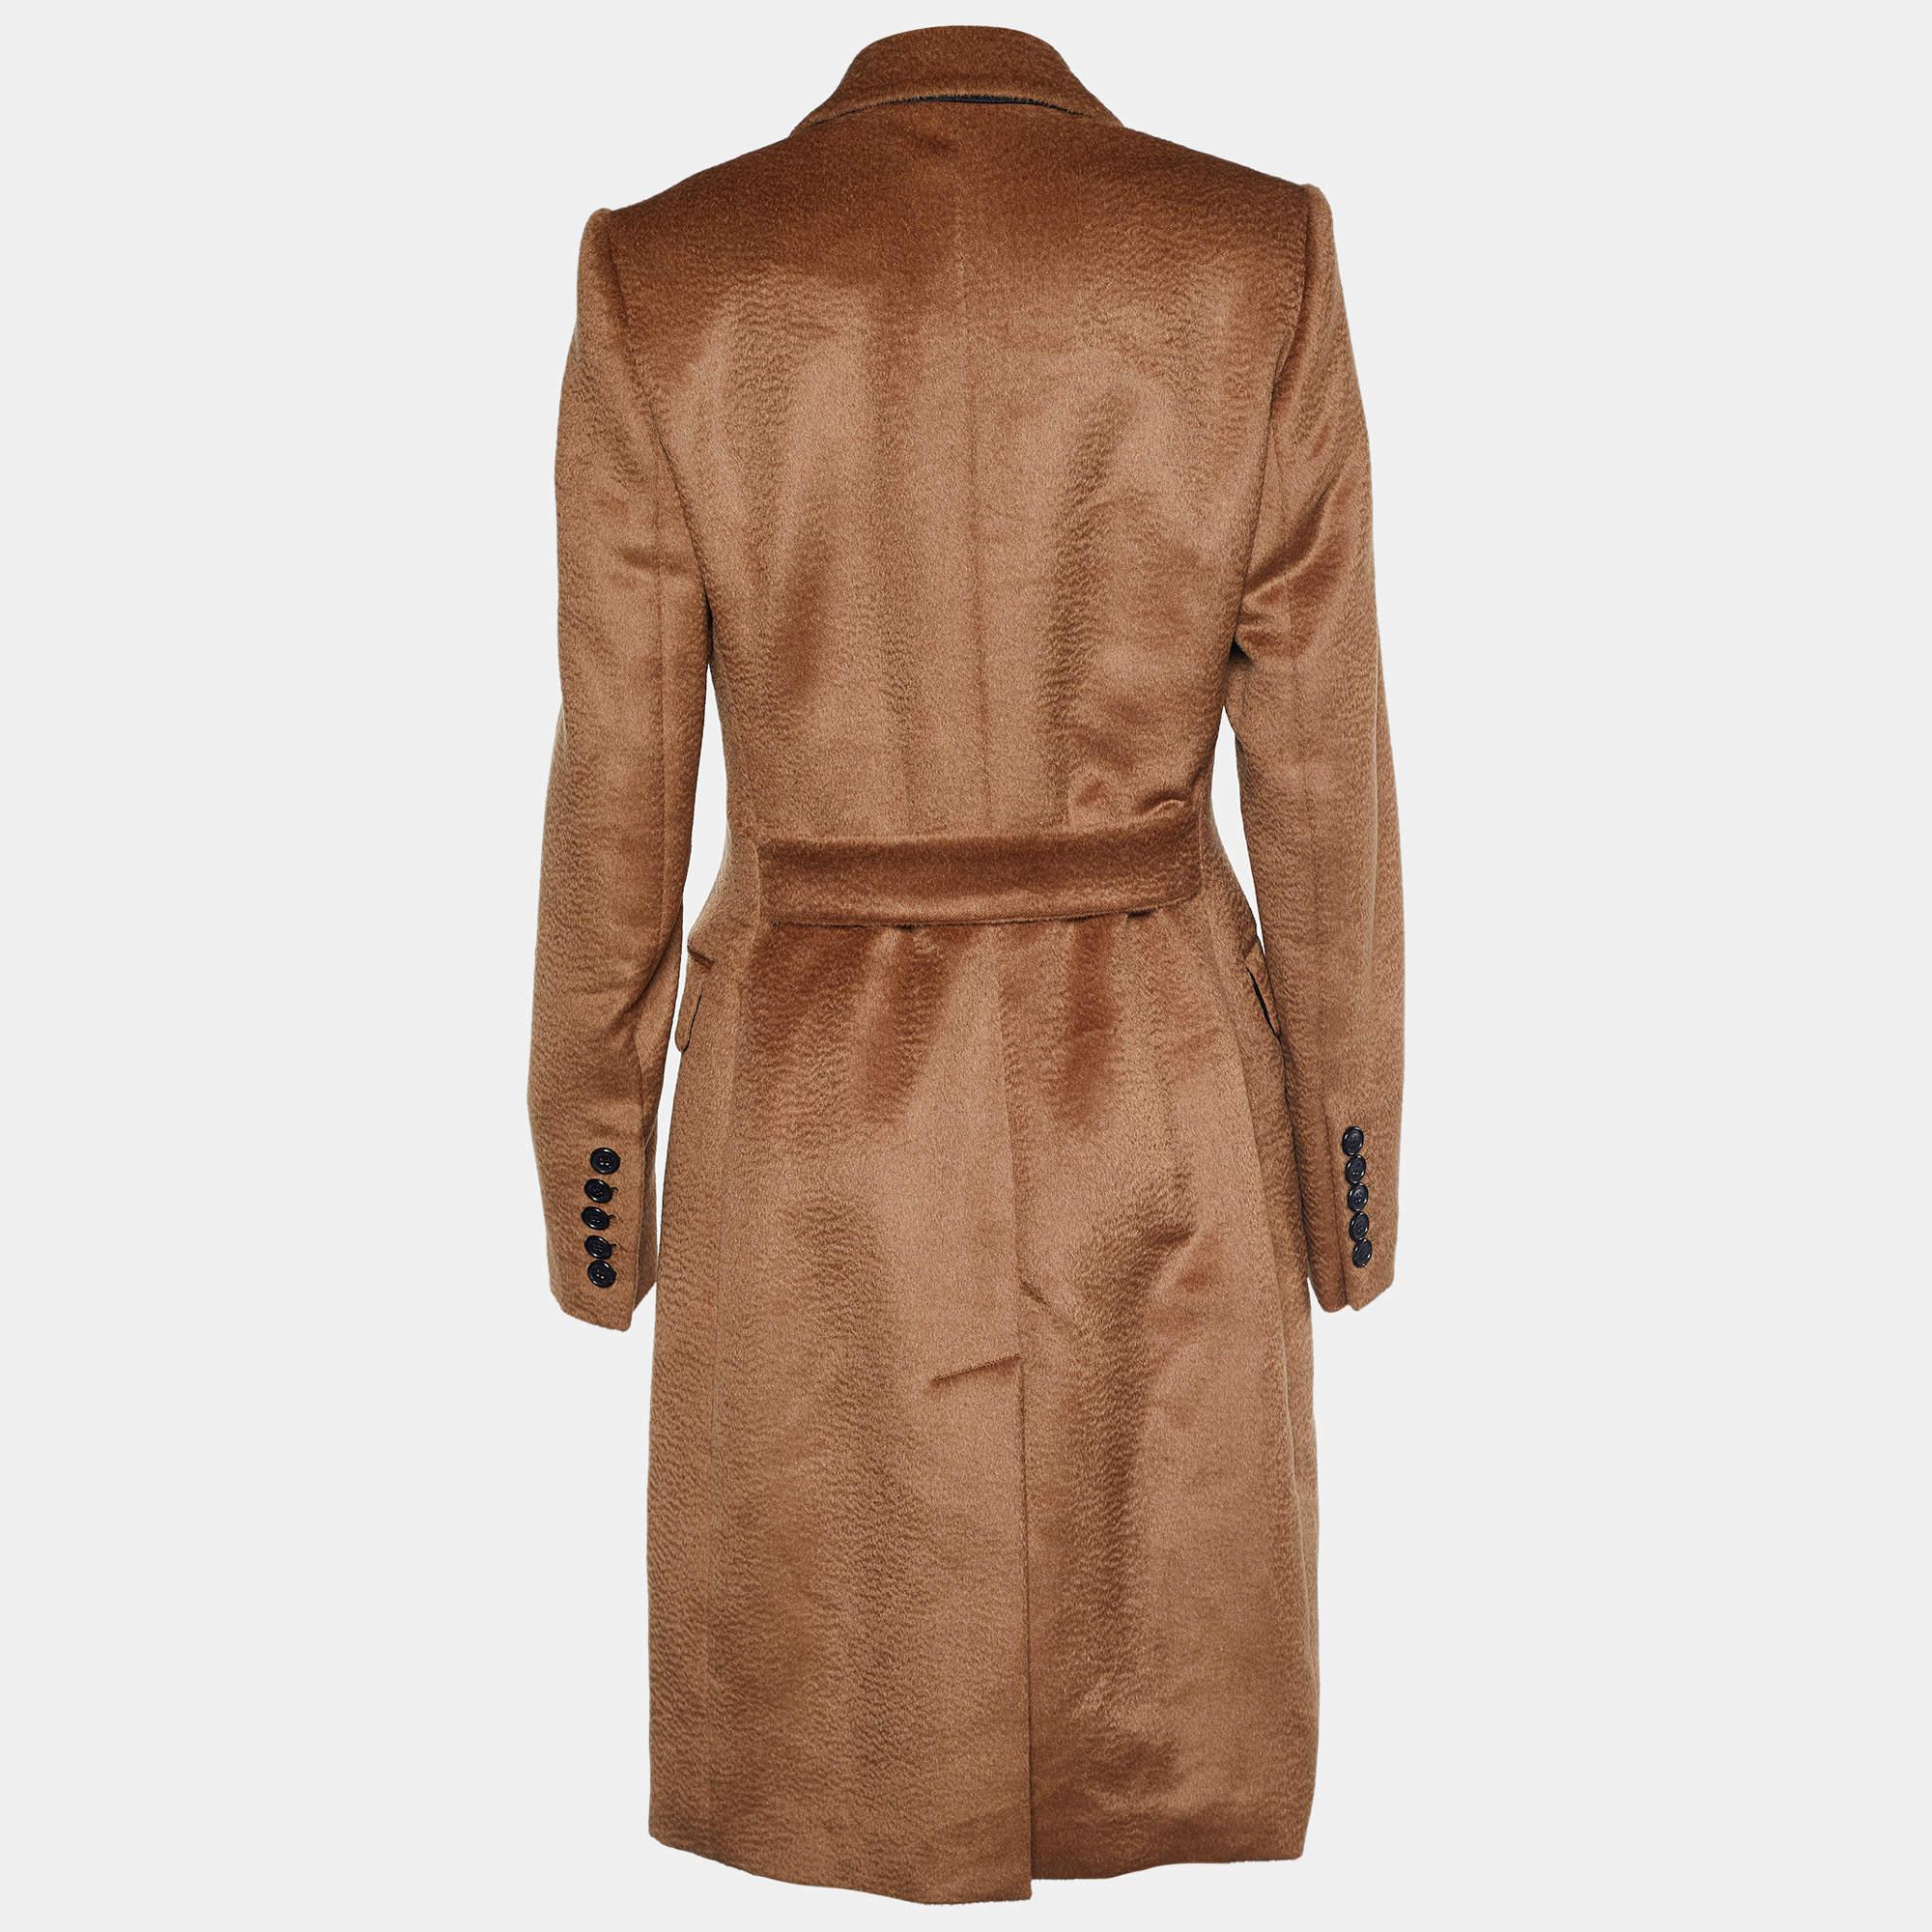 Coats like this are the epitome of functionality and luxury. Tailored into a great fit using quality fabrics, this Trench coat is highlighted with buttons and a classy hue. Wear it with your formal or dressy outfits.

